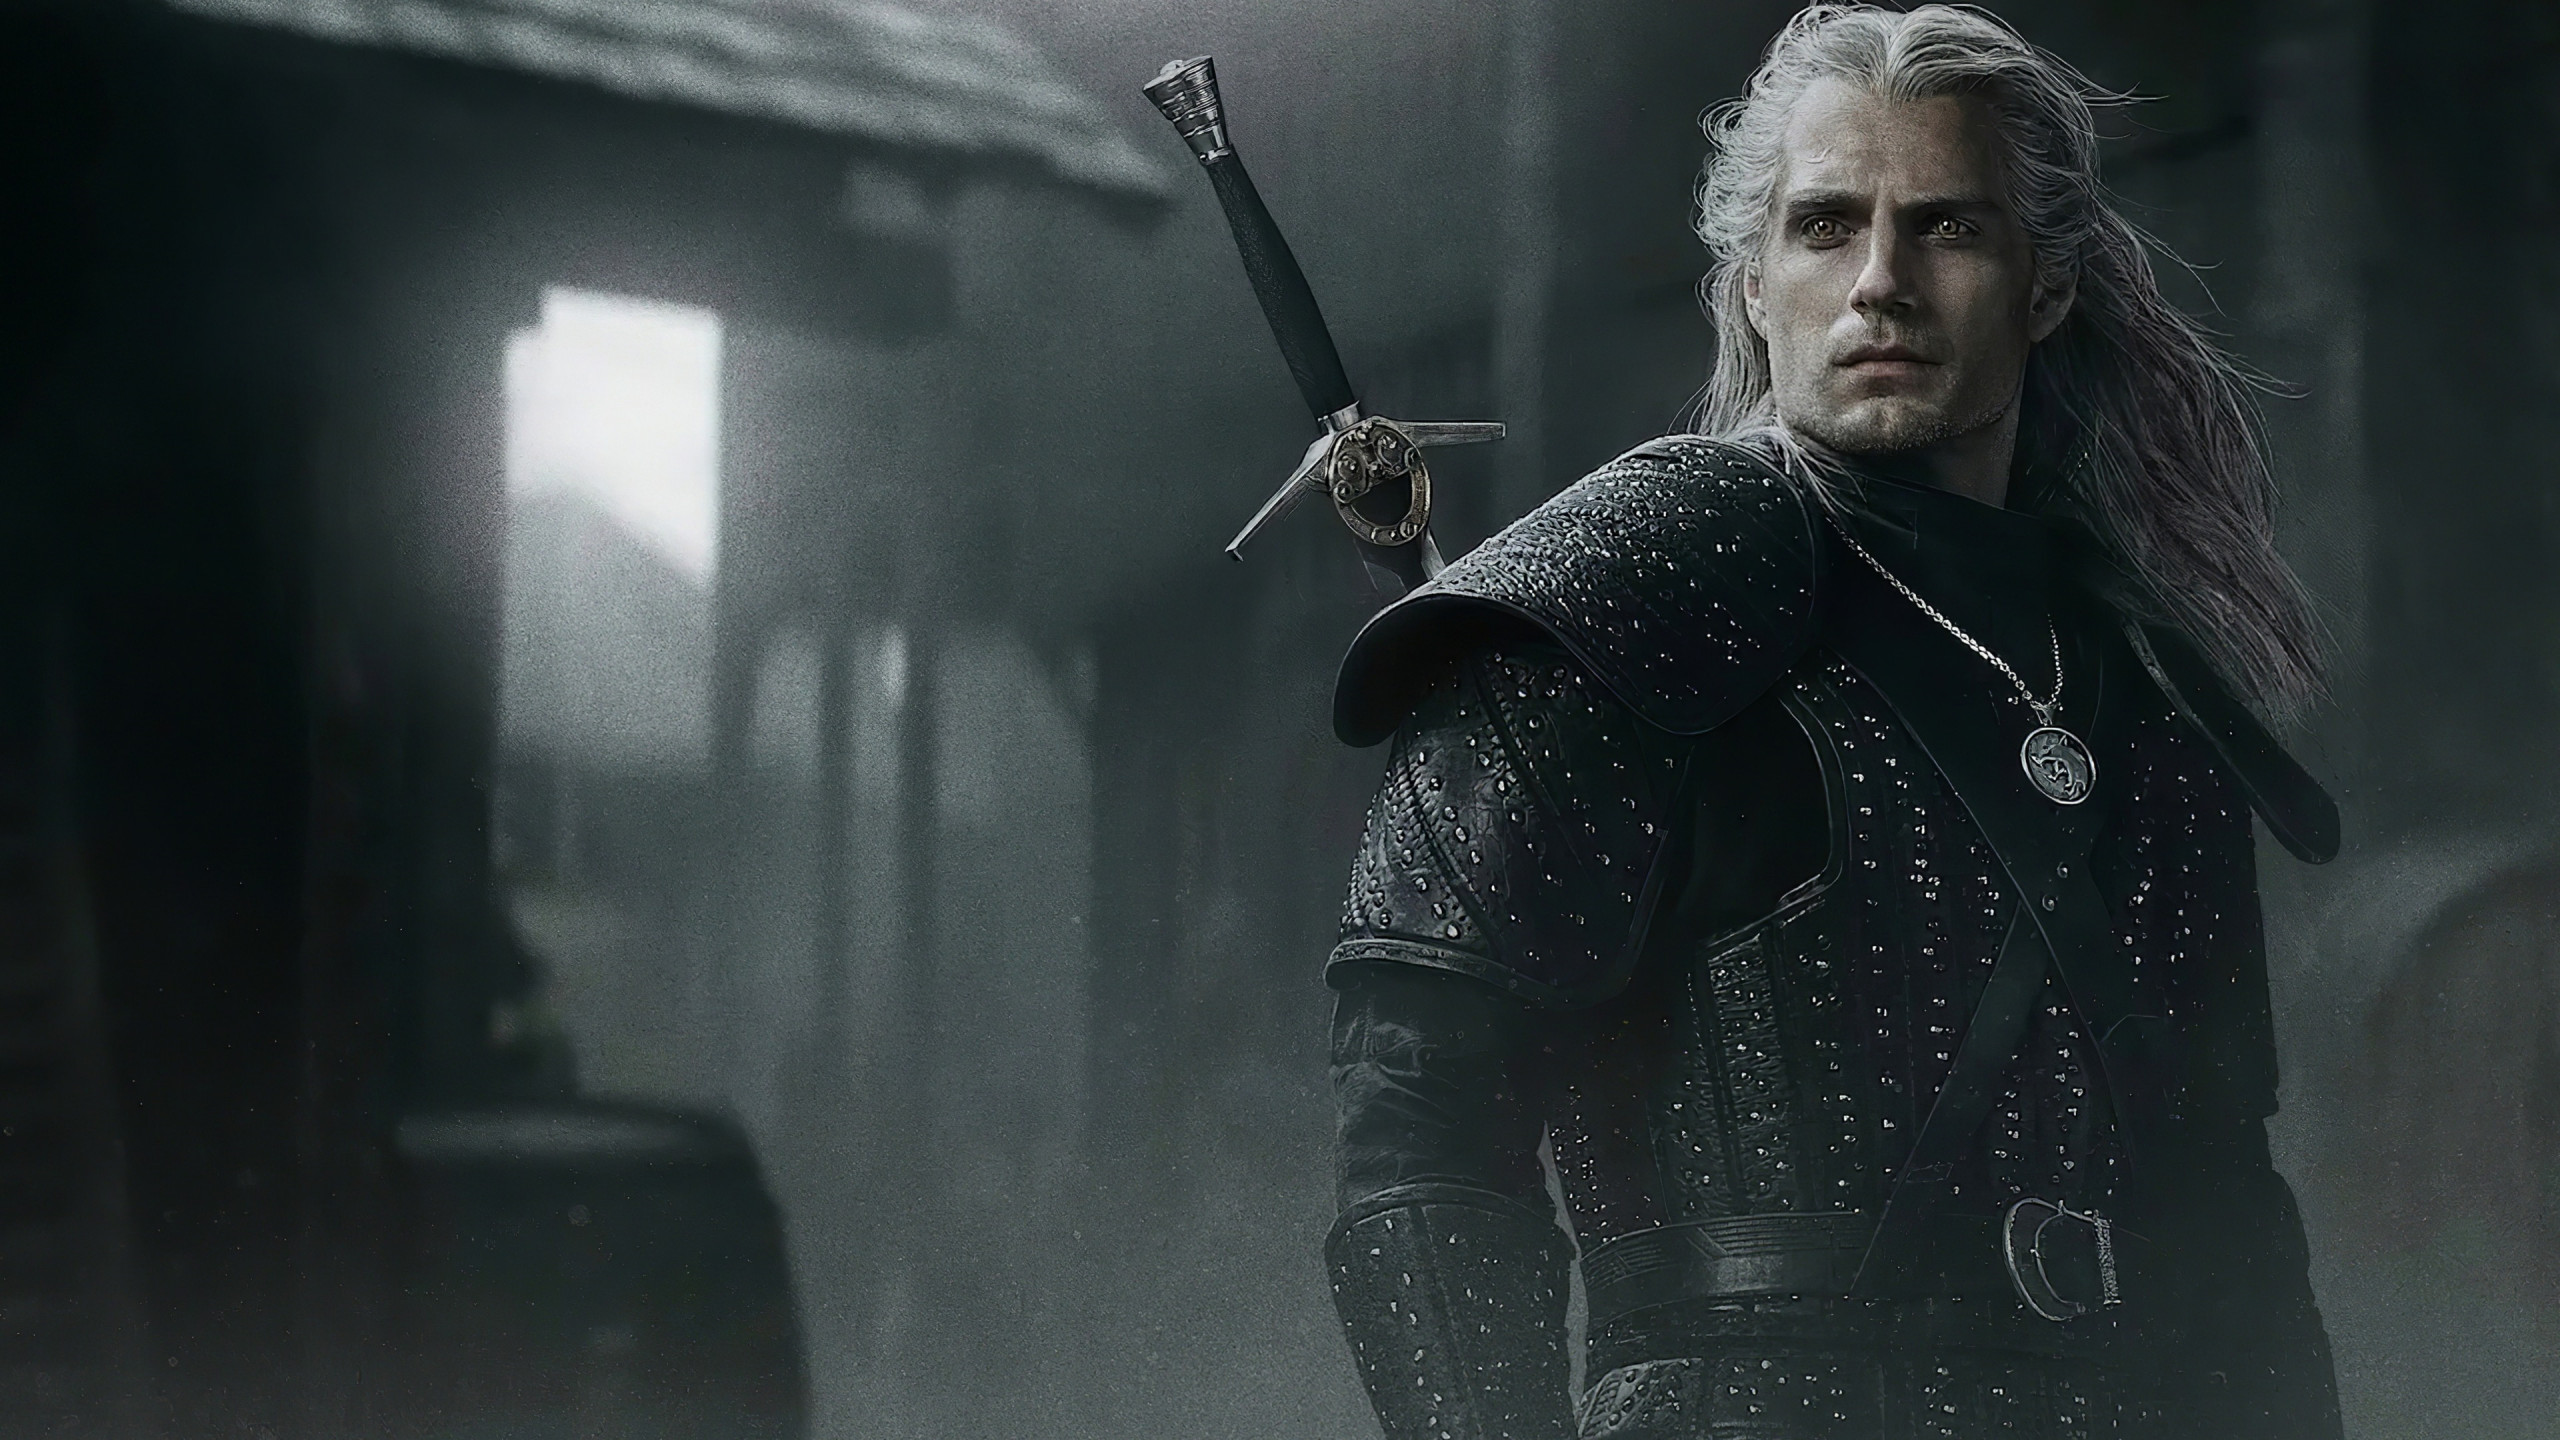 Henry Cavli in The Witcher wallpaper 2560x1440